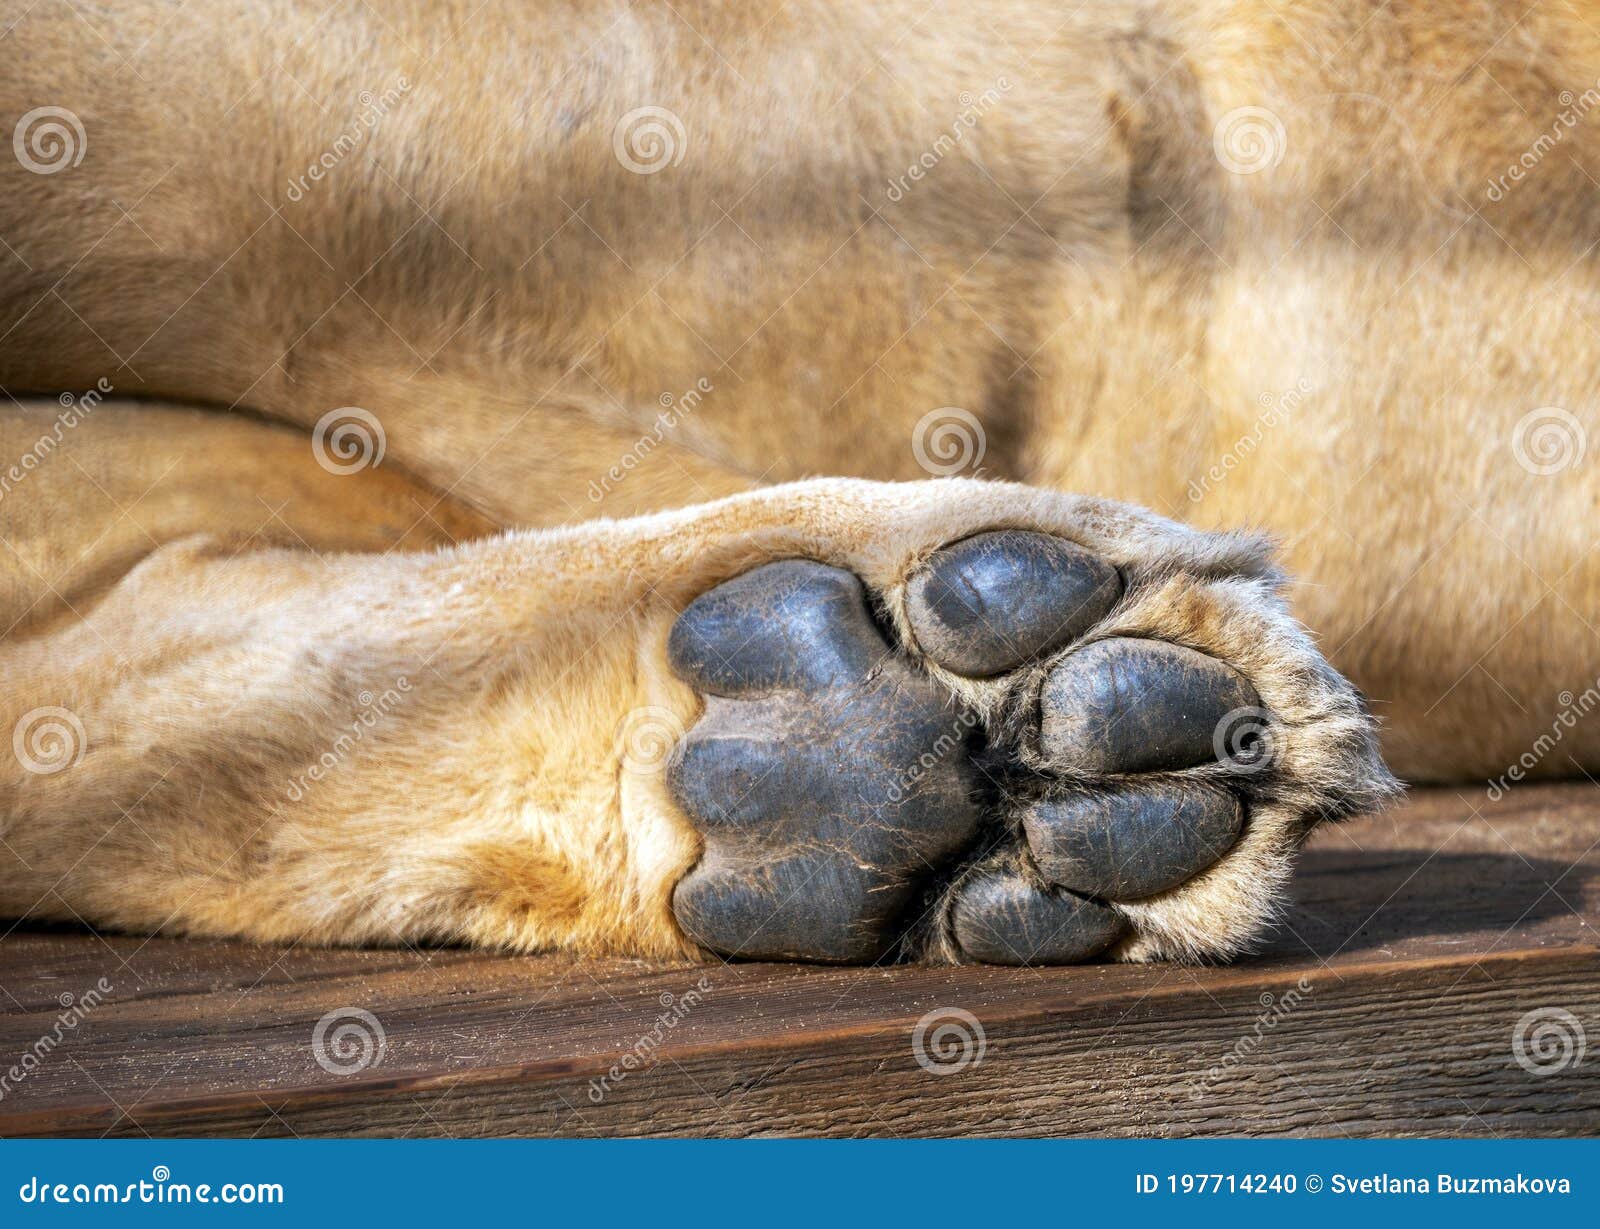 The Foot of the Lion`s Hind Paw the Background of the Animal`s Belly. Leo Rests Lying Down. Stock Photo - Image of feline, animal: 197714240